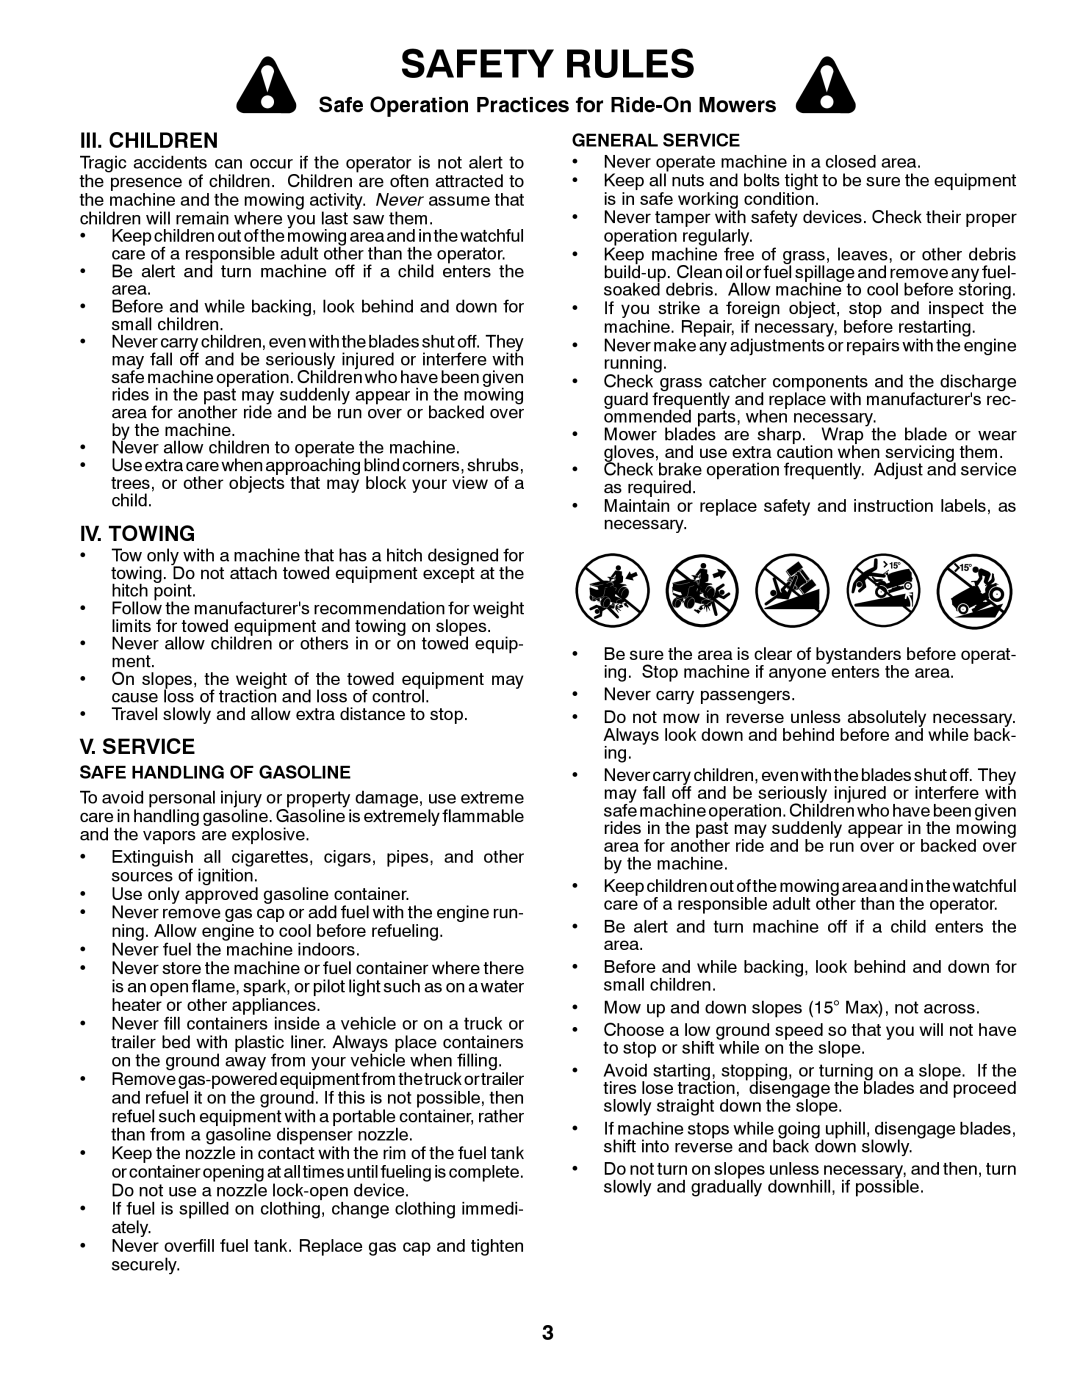 Husqvarna TS300-E3 manual Iii. Children, Iv. Towing, V. Service, Safety Rules, Safe Operation Practices for Ride-On Mowers 